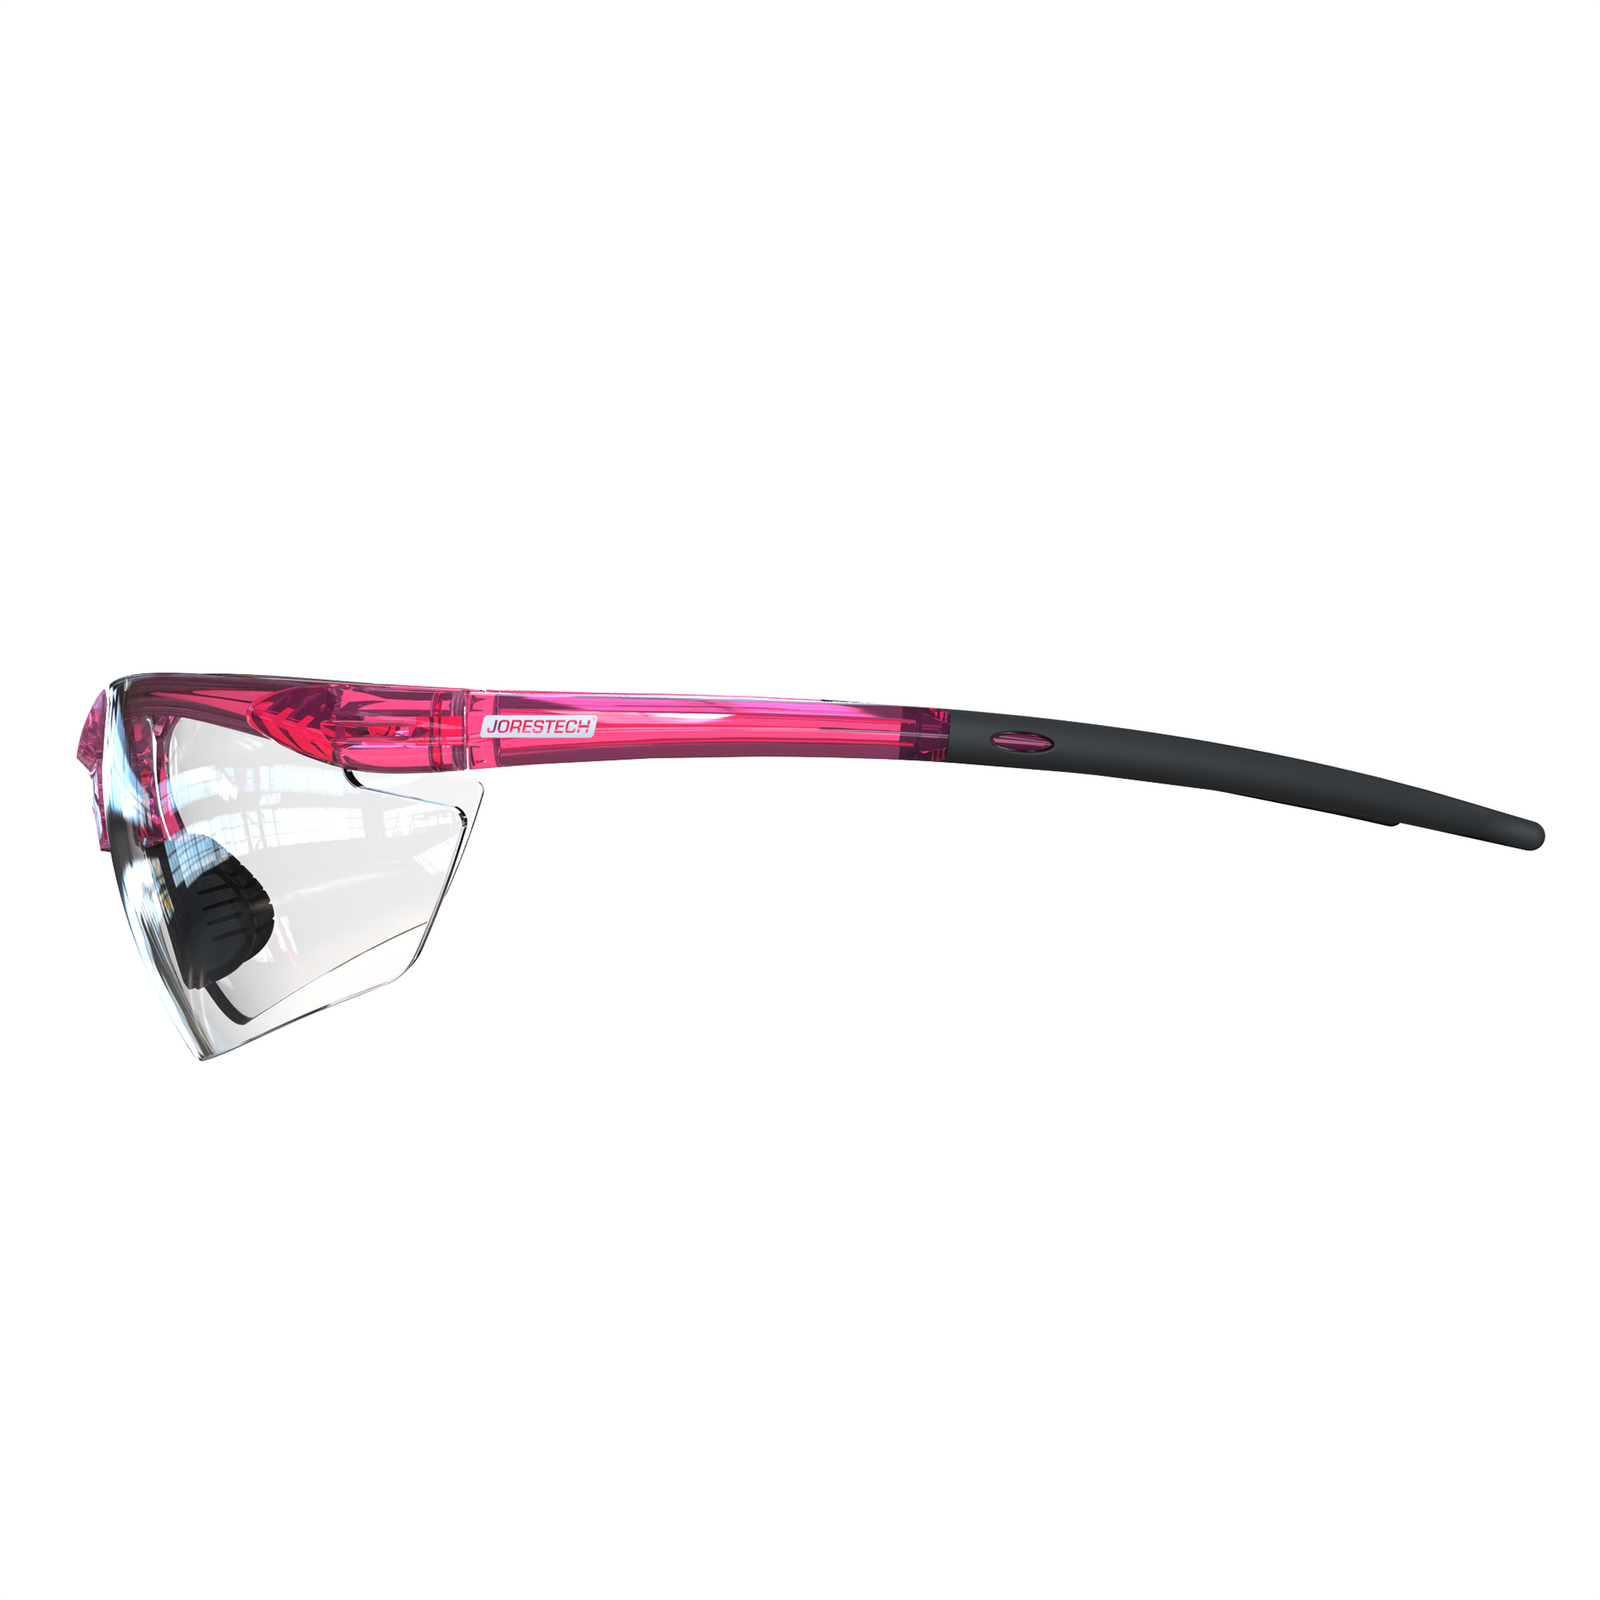 Comfortable safety glasses for hi impact protection with flexible temples